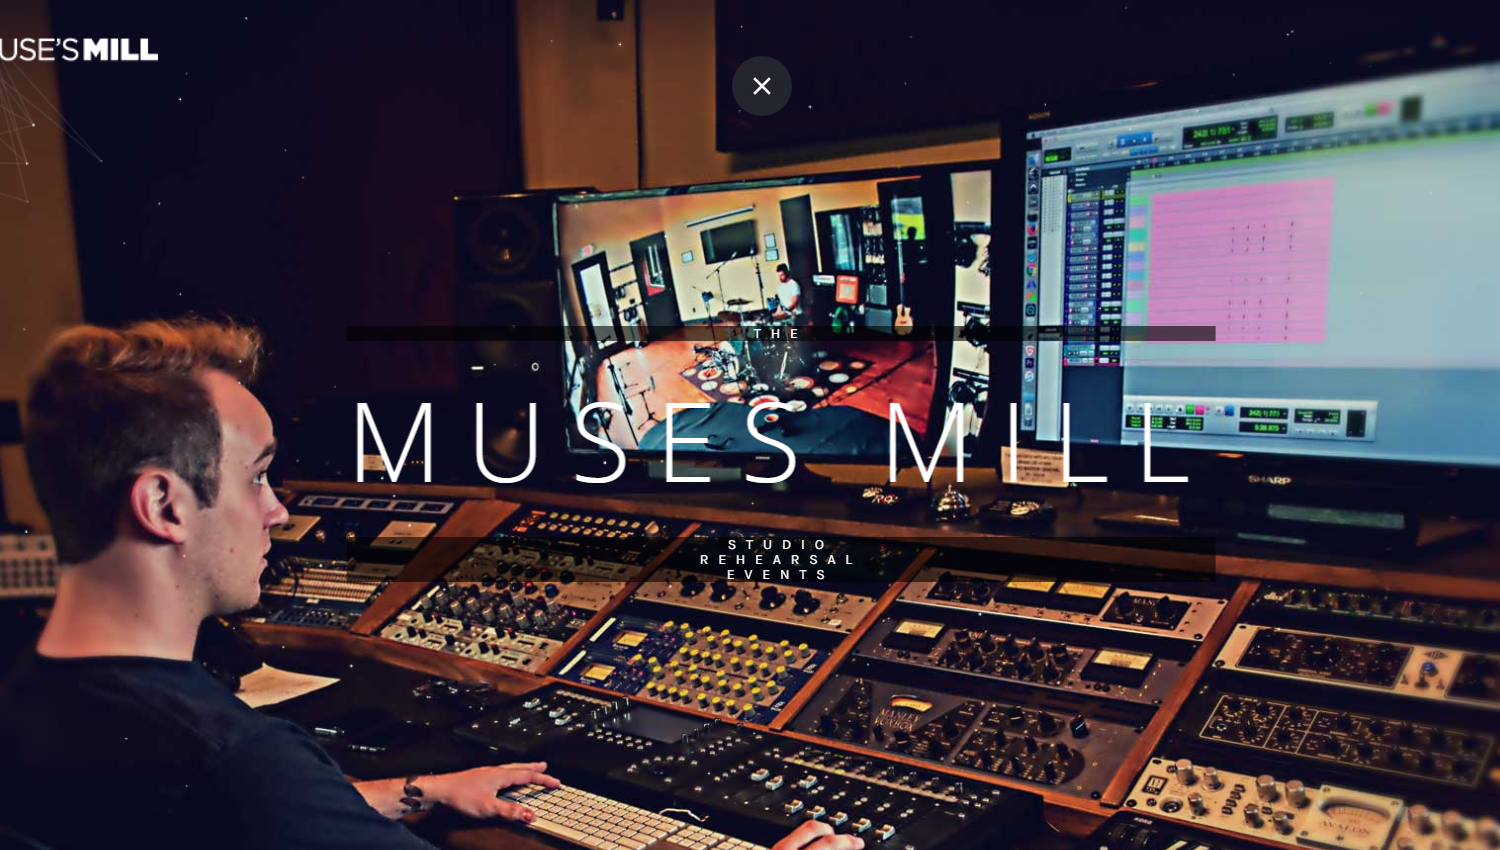 Muses Mill